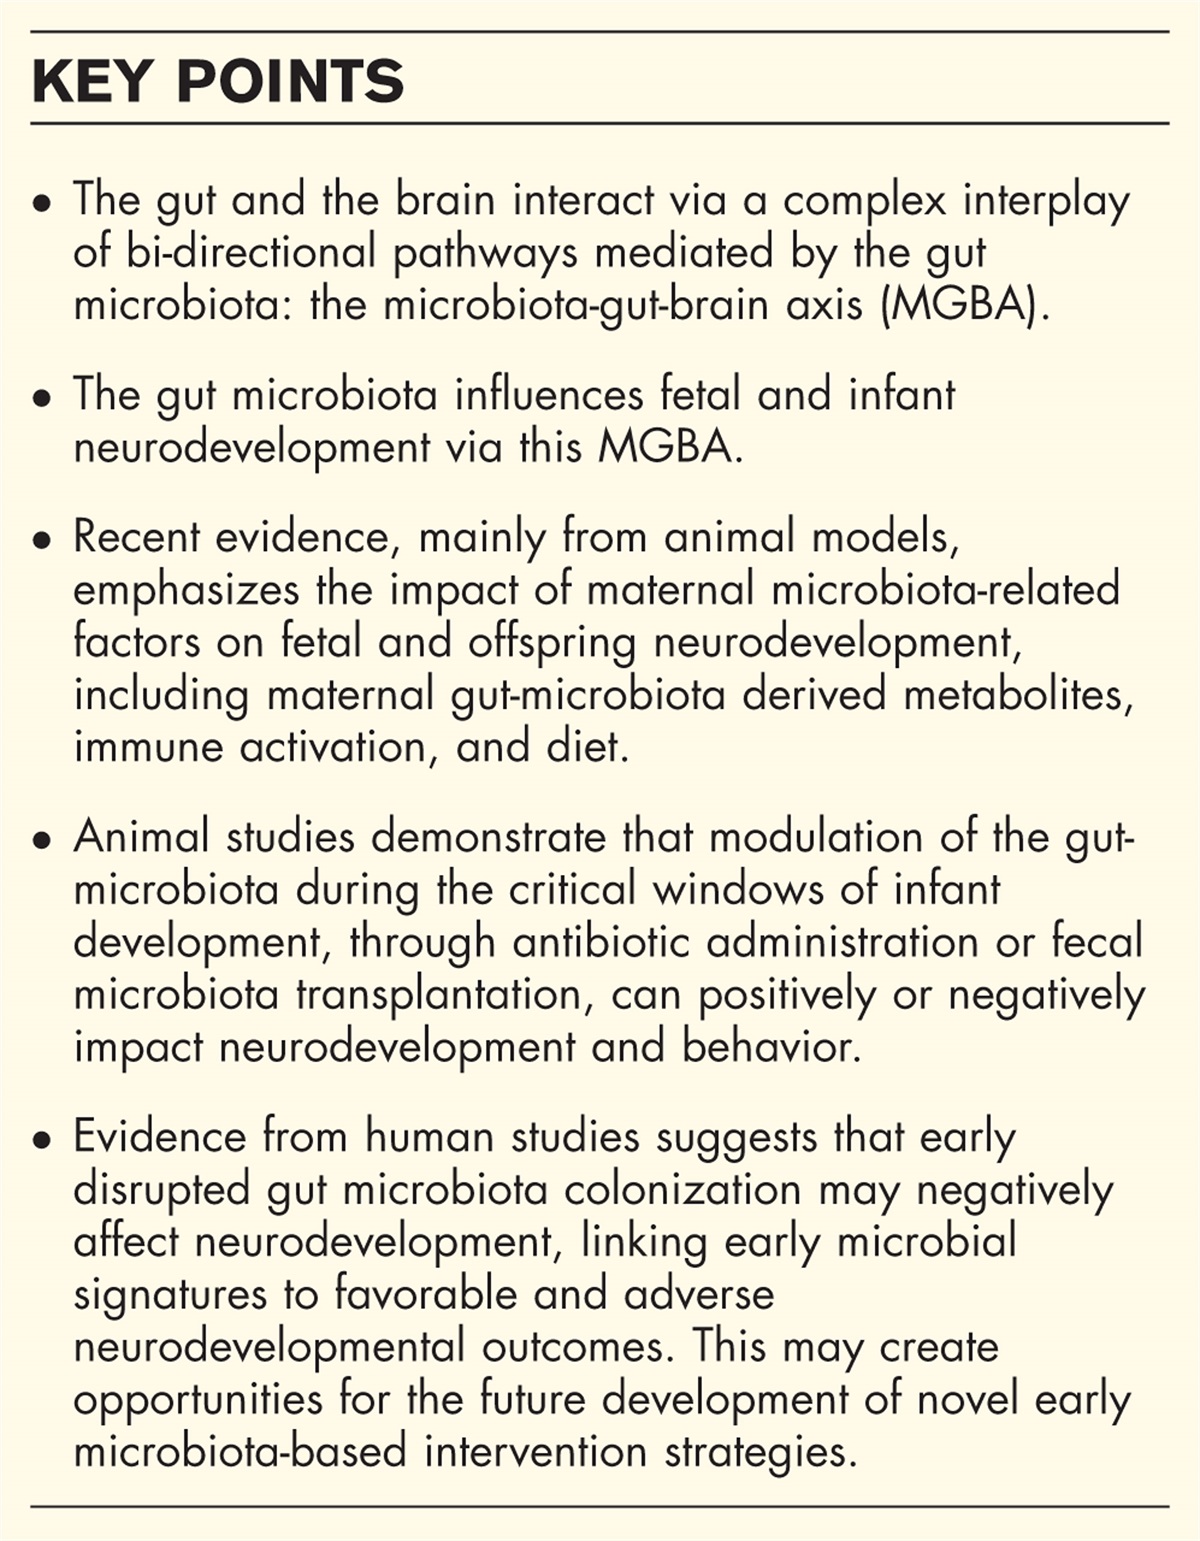 Microbiome and its impact on fetal and neonatal brain development: current opinion in pediatrics